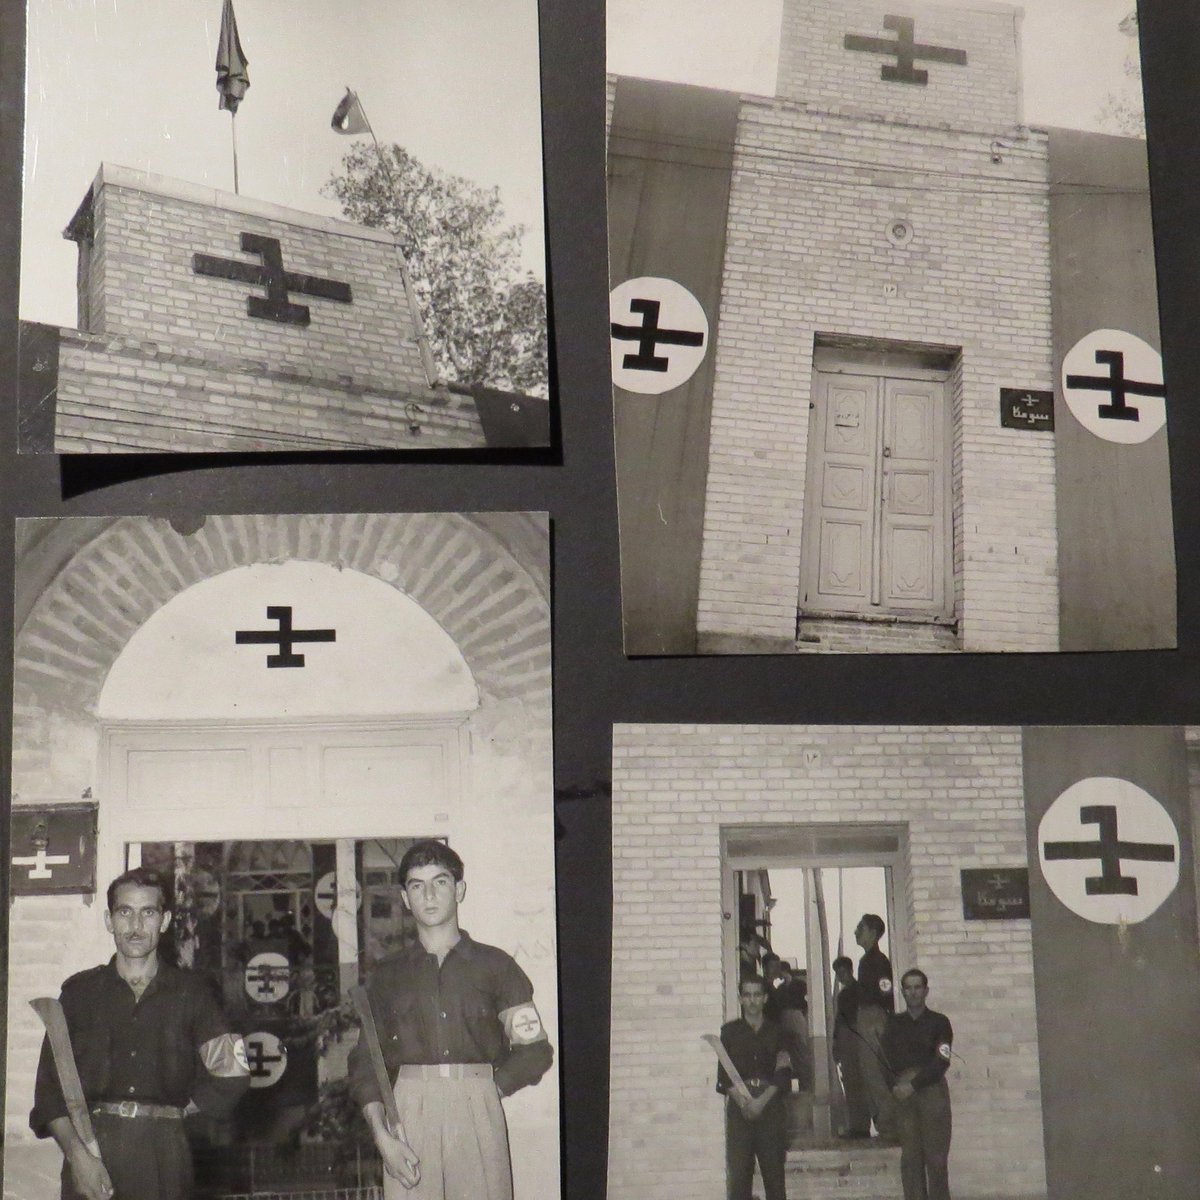 Finally, some teenaged members guarding the Sumka Party House on Khanqah Street in Tehran. If anyone knows what became of this building, pls let me know! All of these photos come from MZ's personal collections and have never been published before. Stay tuned for more tomorrow!